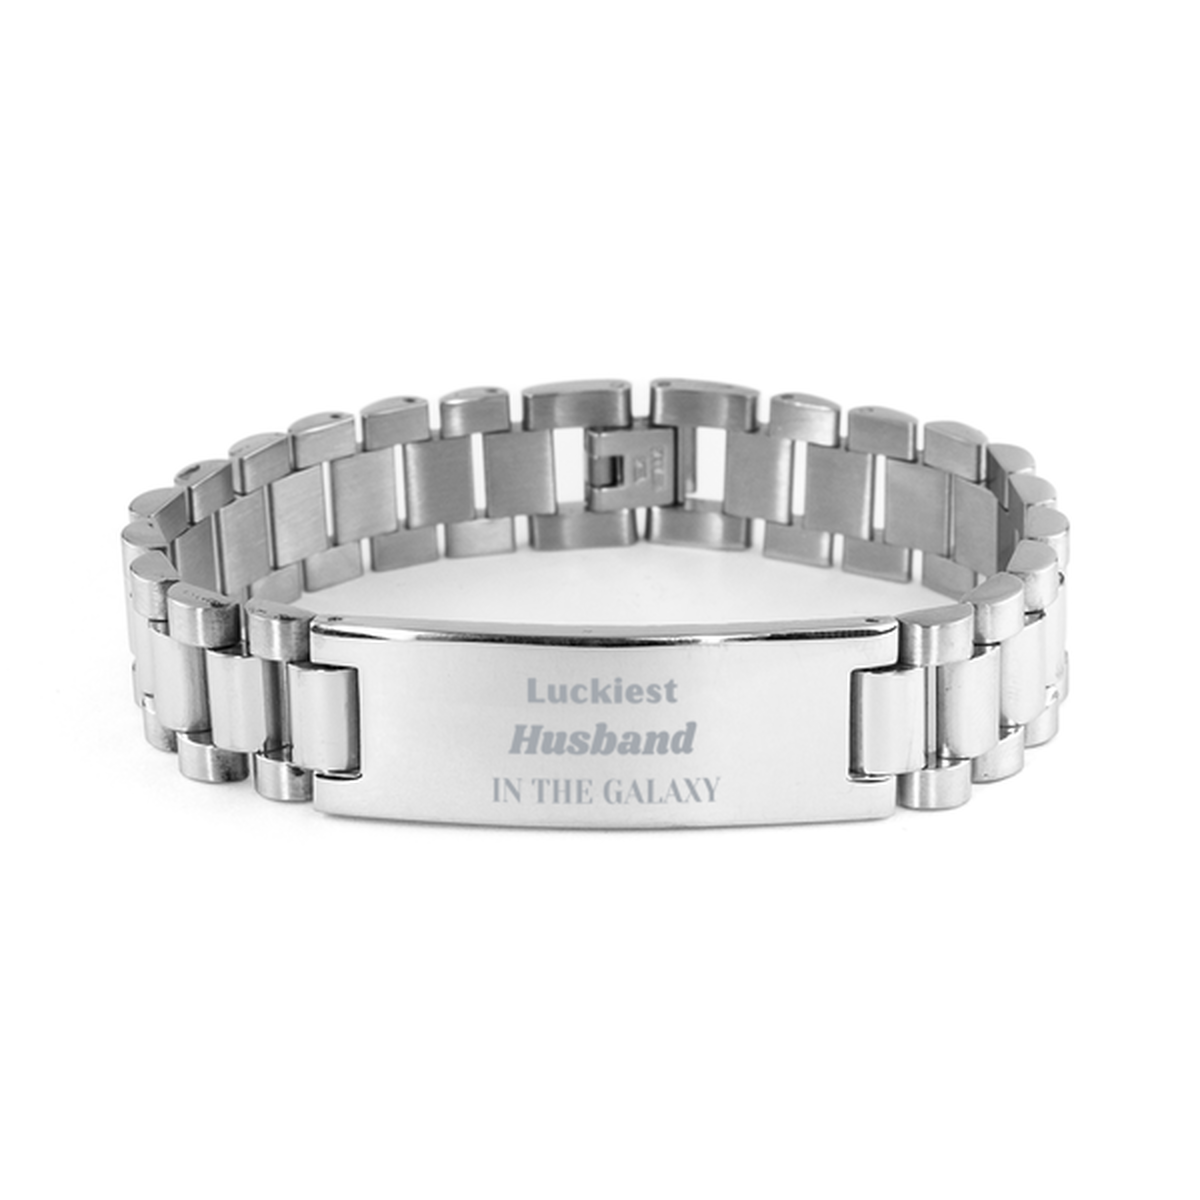 Luckiest Husband in the Galaxy, To My Husband Engraved Gifts, Christmas Husband Ladder Stainless Steel Bracelet Gifts, X-mas Birthday Unique Gifts For Husband Men Women